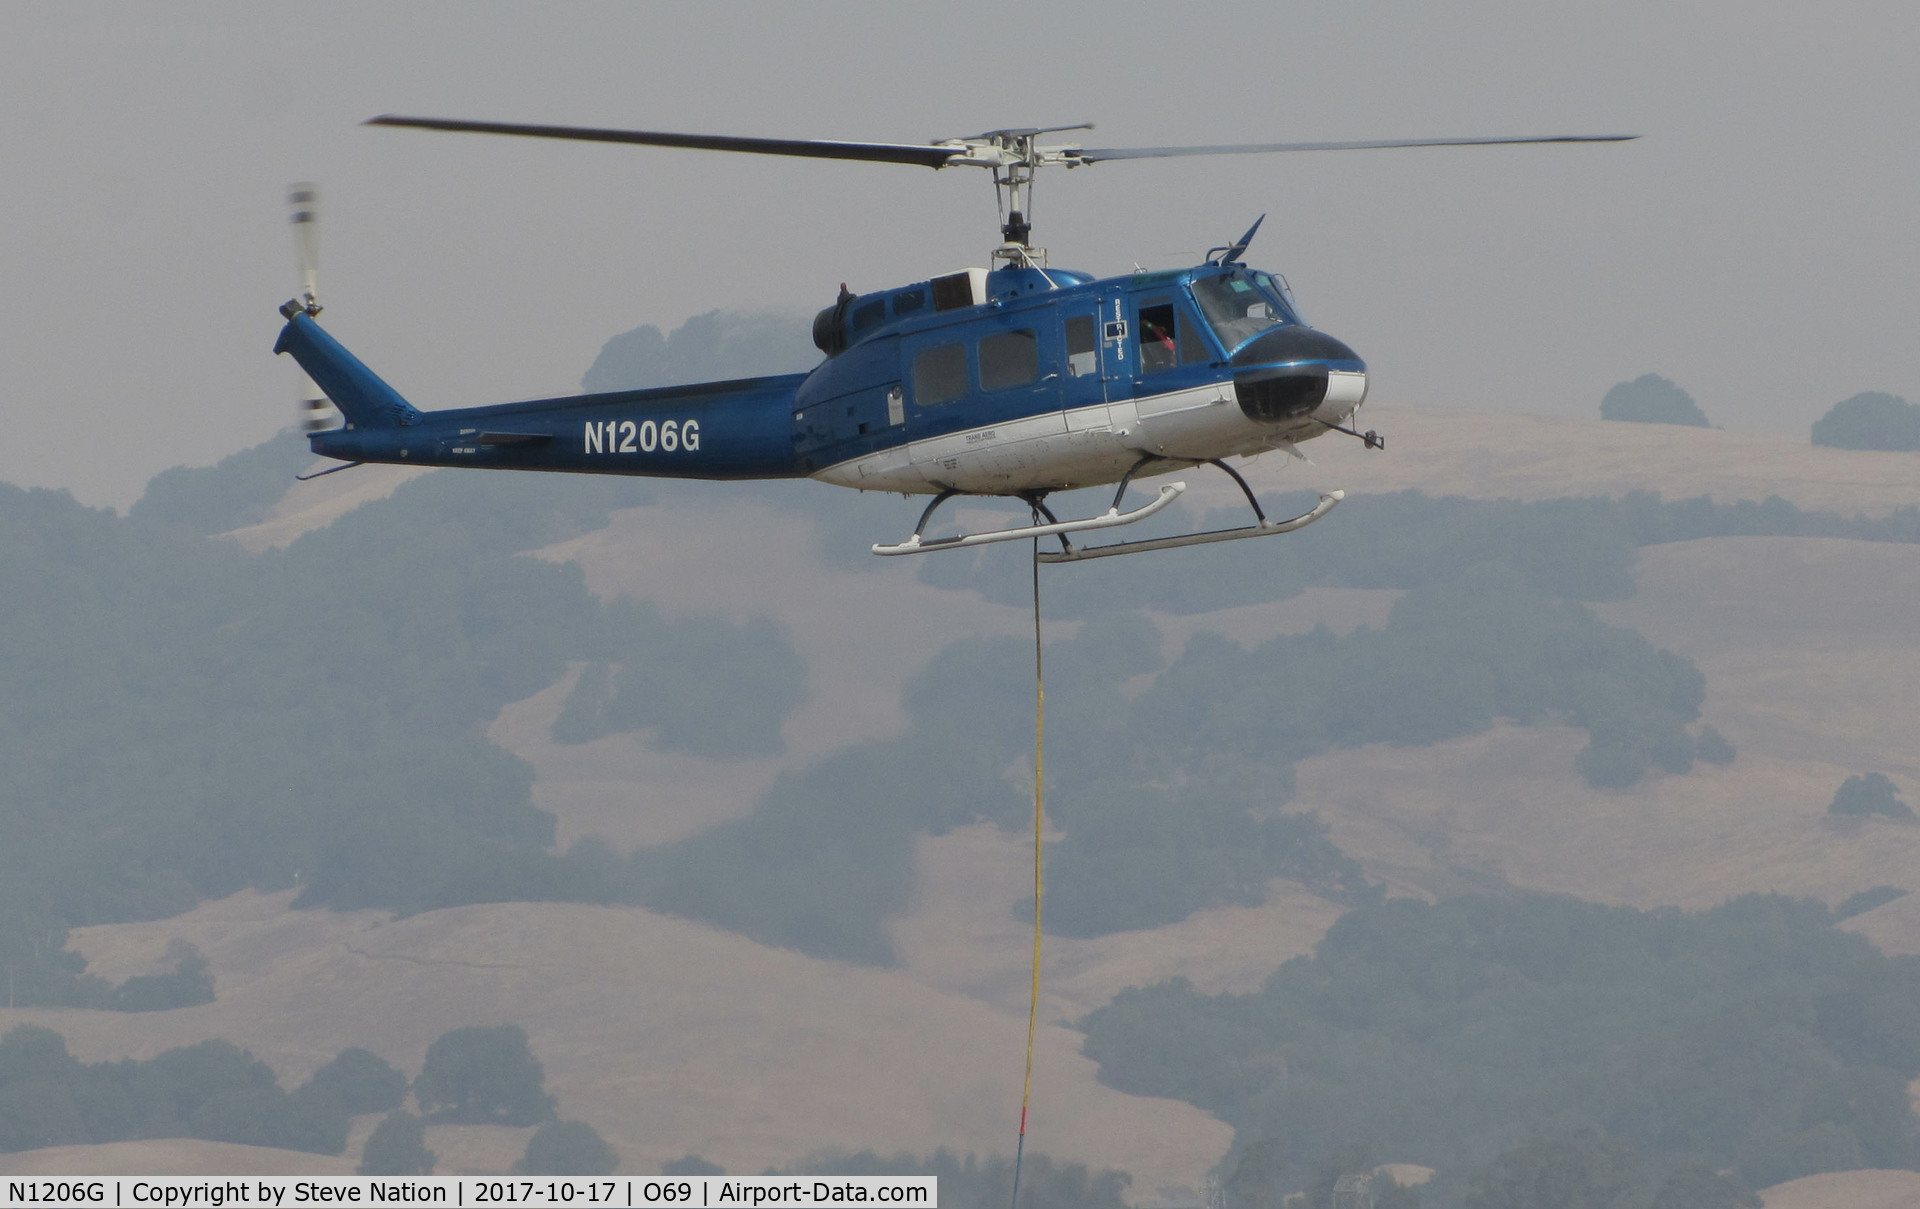 N1206G, 1966 Bell UH-1H Iroquois C/N 5269 (66-0786), Trans Aero (Cheyenne, WY) 1966 Bell UH-1H hovering at Petaluma Municipal Airport, CA temporary home base after making water drops on the devastating October 2017 Northern California wildfires